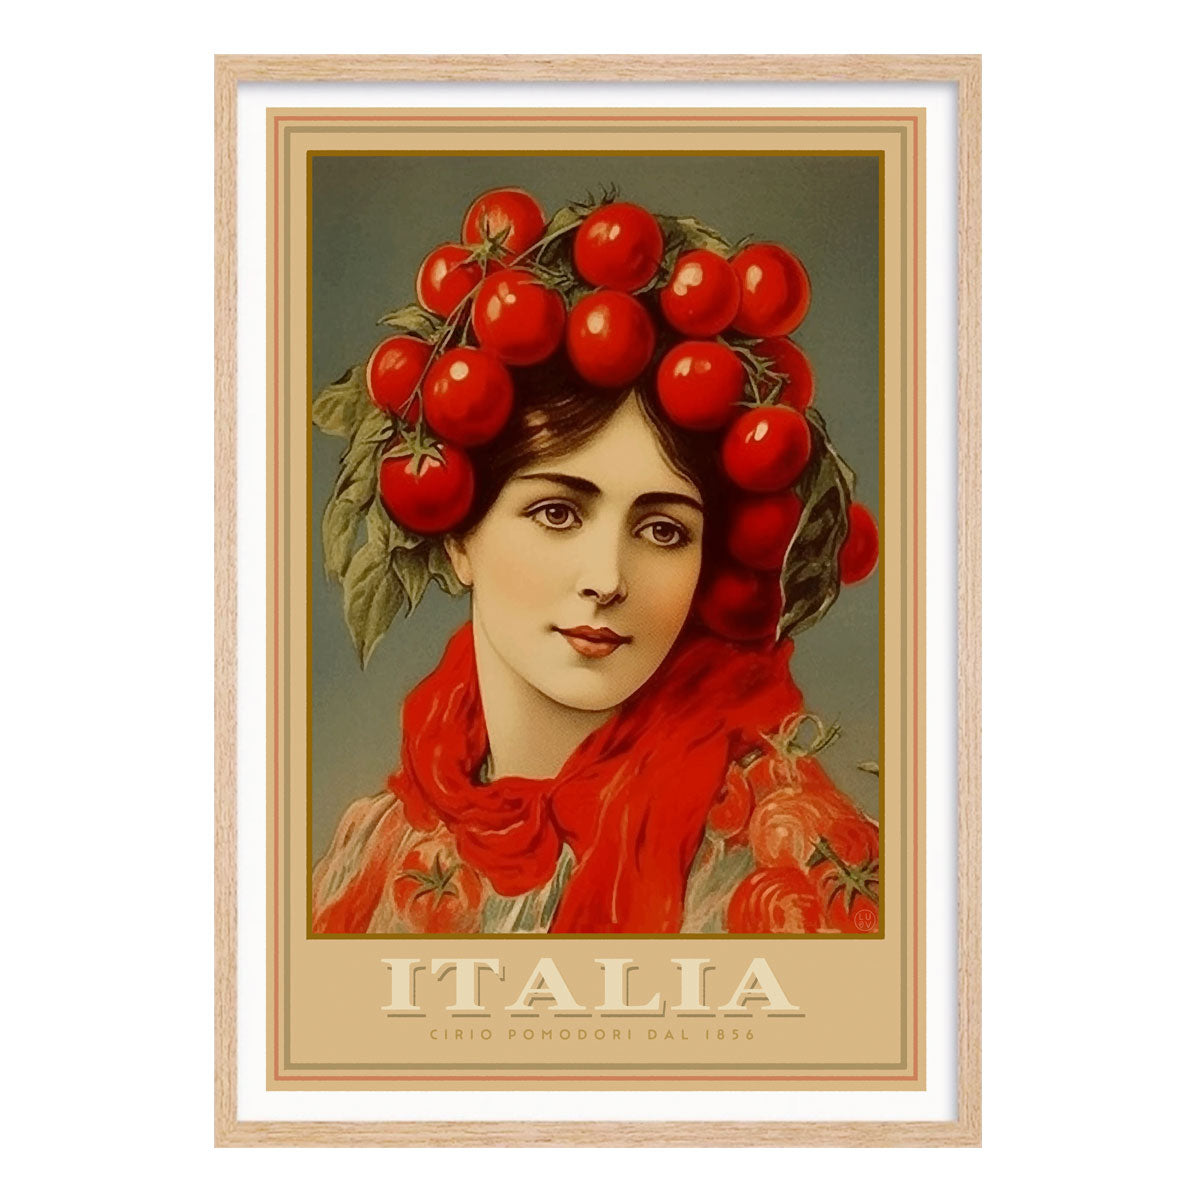 Tom girl Italy retro vintage poster print in oak frame from Places We Luv